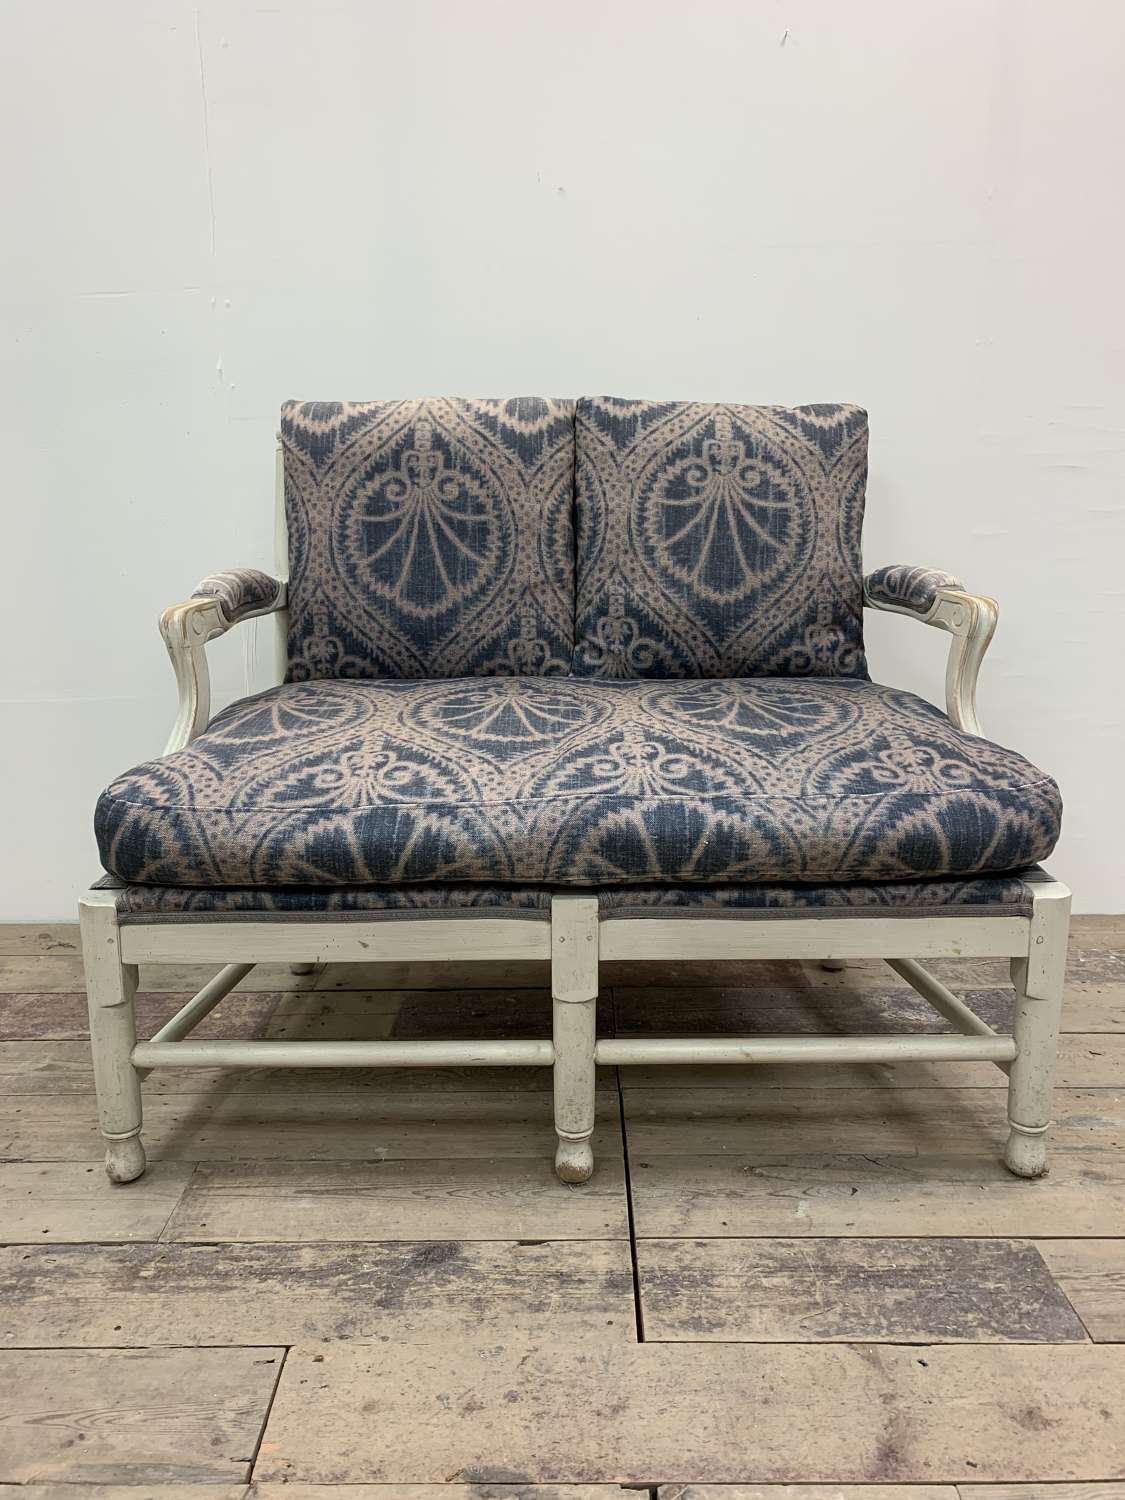 Mid 20th century Gripsholm painted Swedish two seat sofa